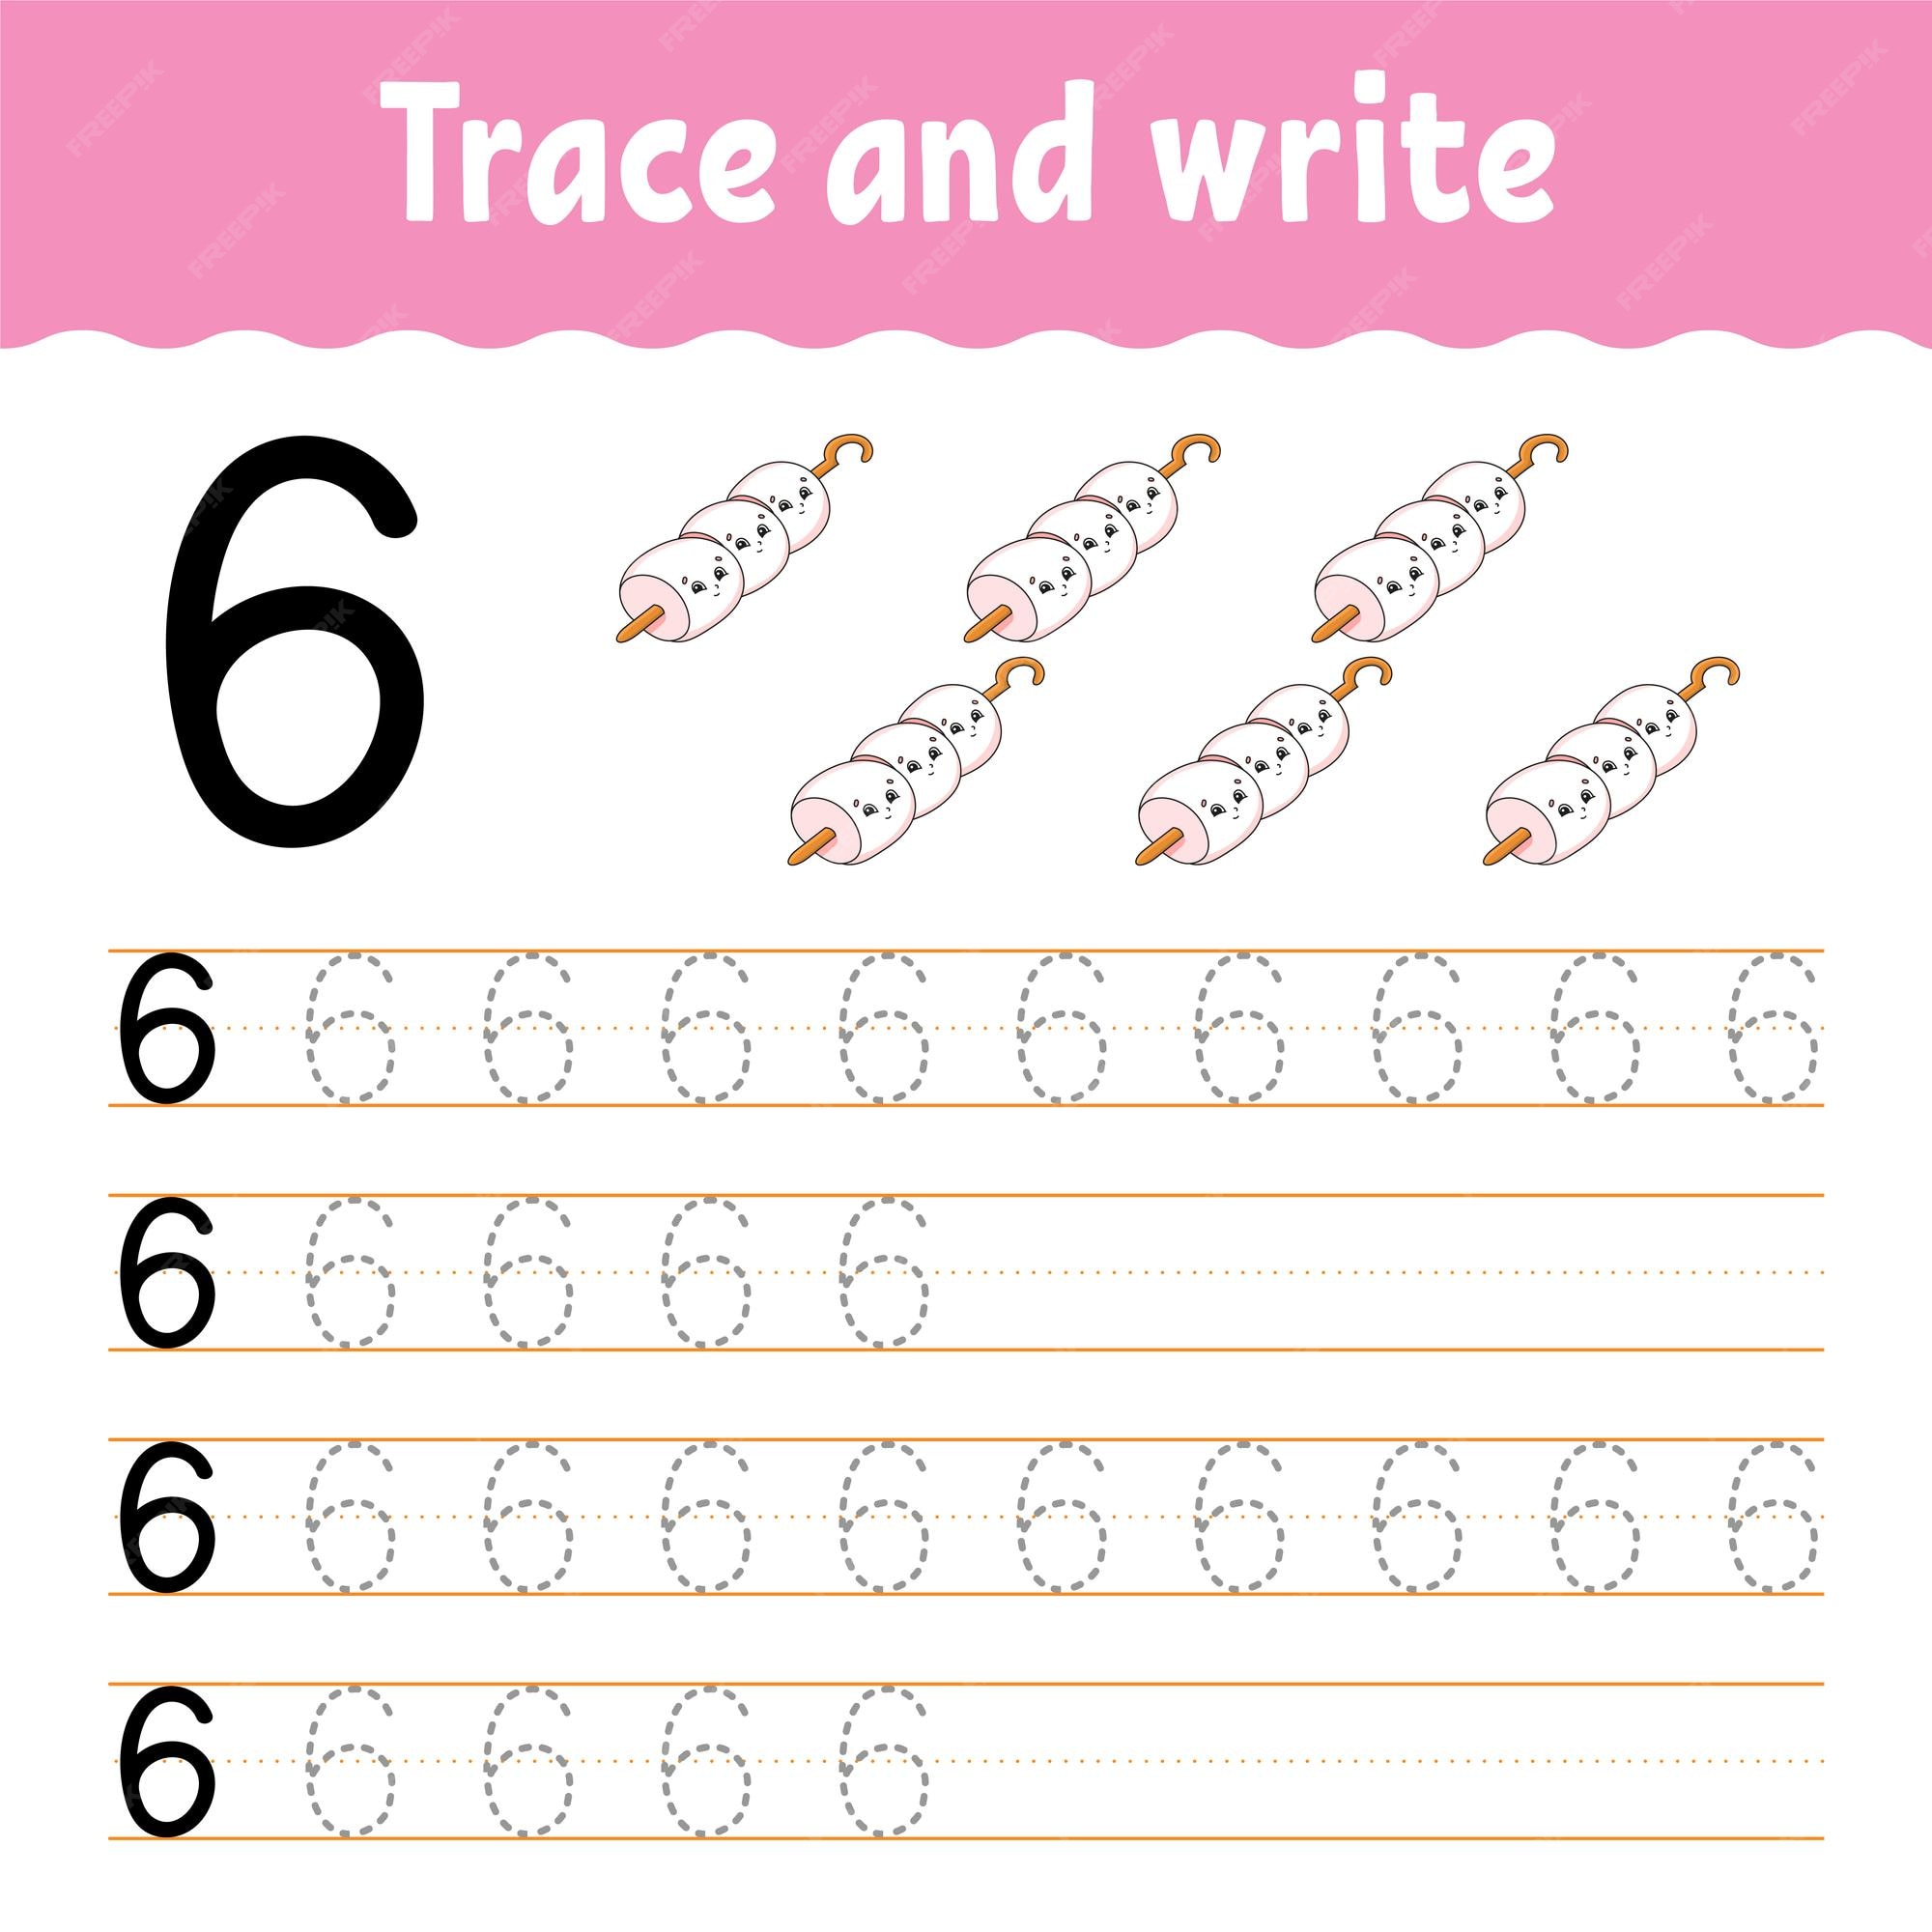 Premium vector learn numbers trace and write handwriting practice education developing worksheet color activity page